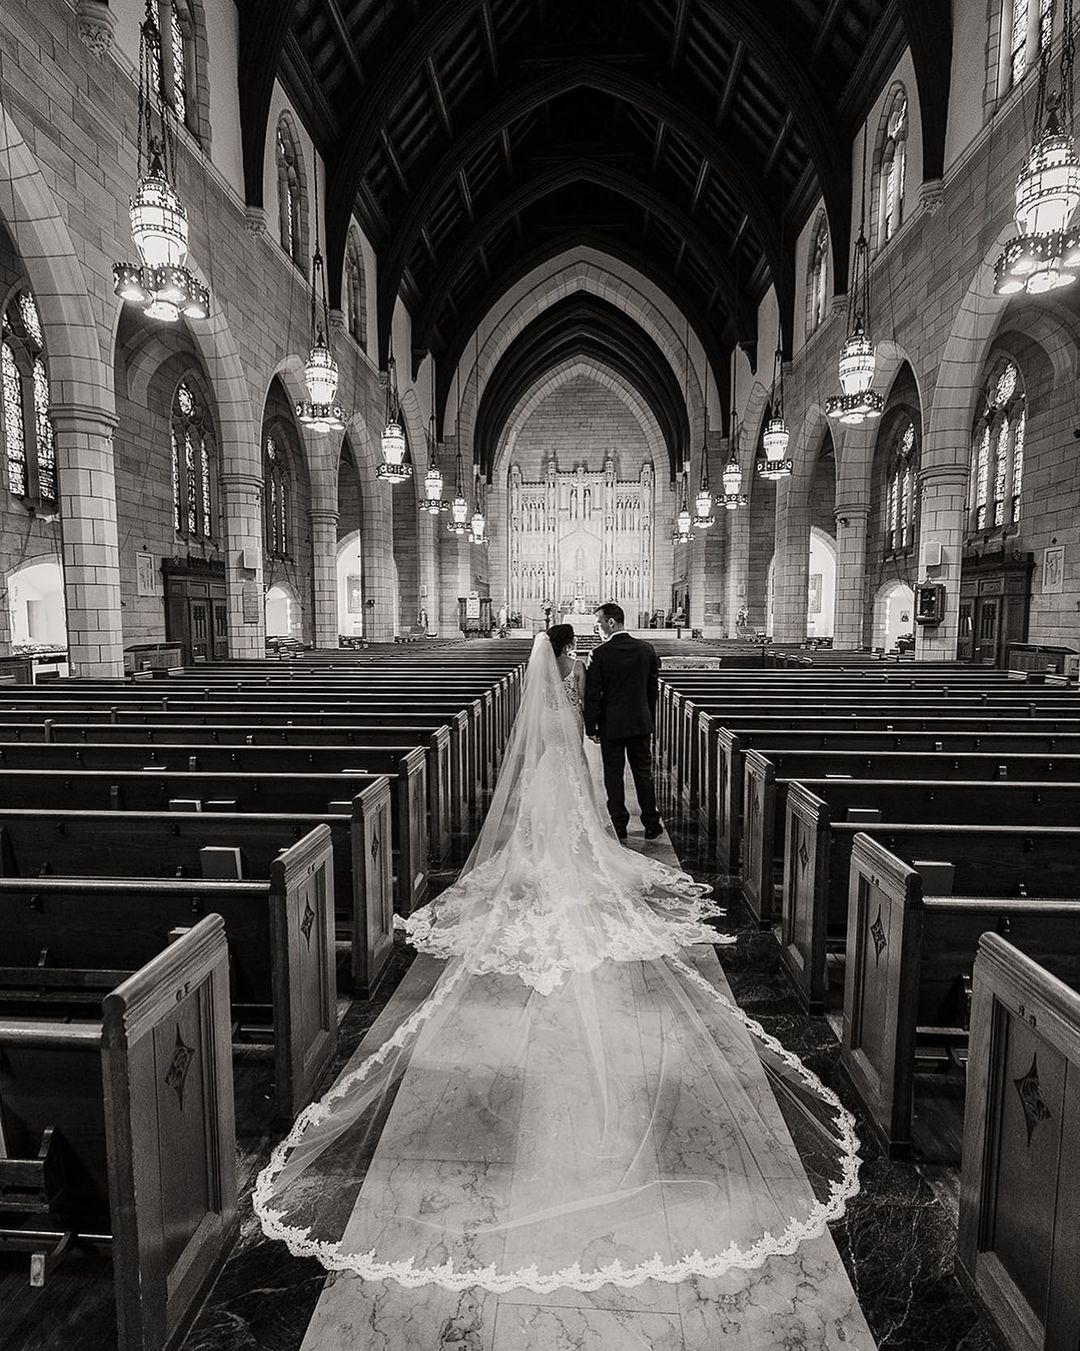 a wedding couple posing in a church in their wedding attire with the brides chapel train spread out beautifully